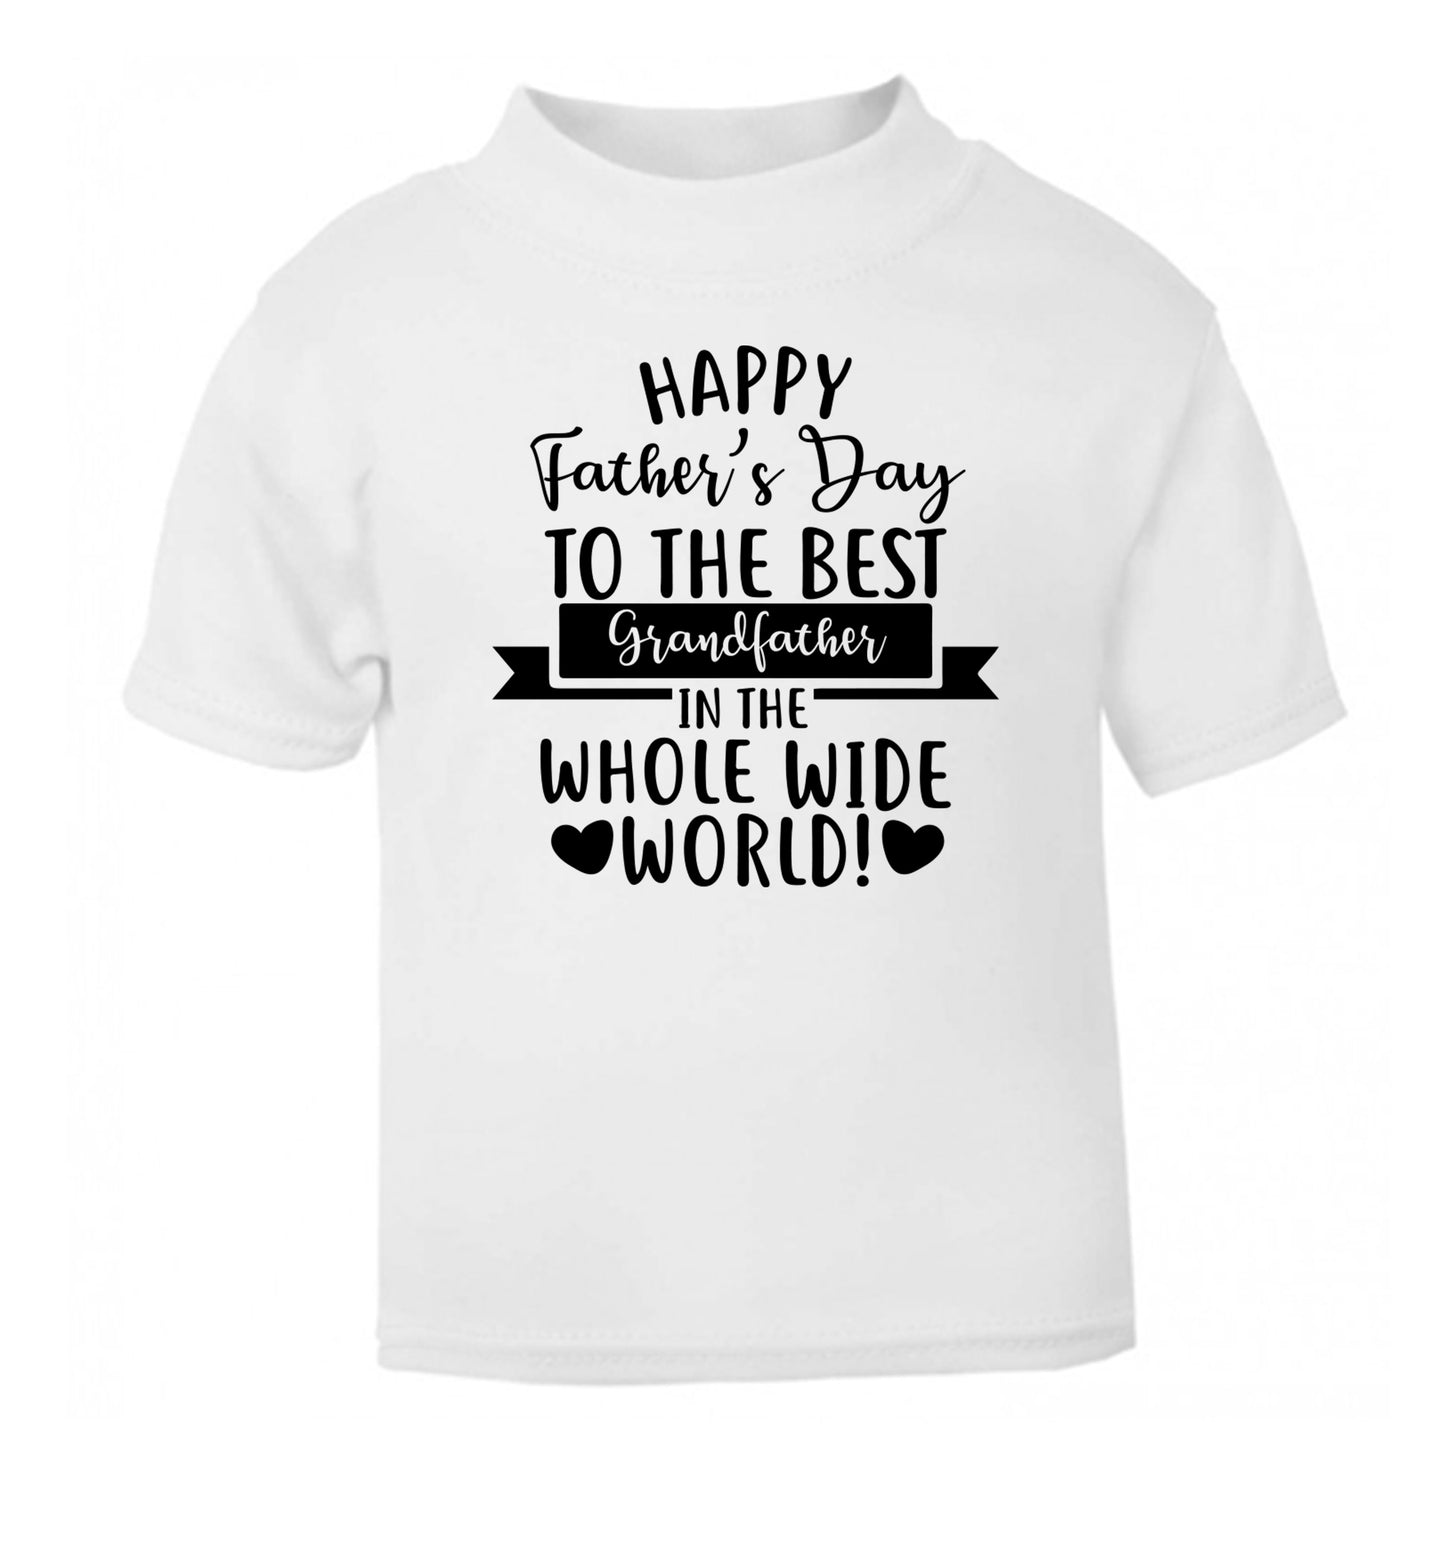 Happy Father's Day to the best grandfather in the world white Baby Toddler Tshirt 2 Years